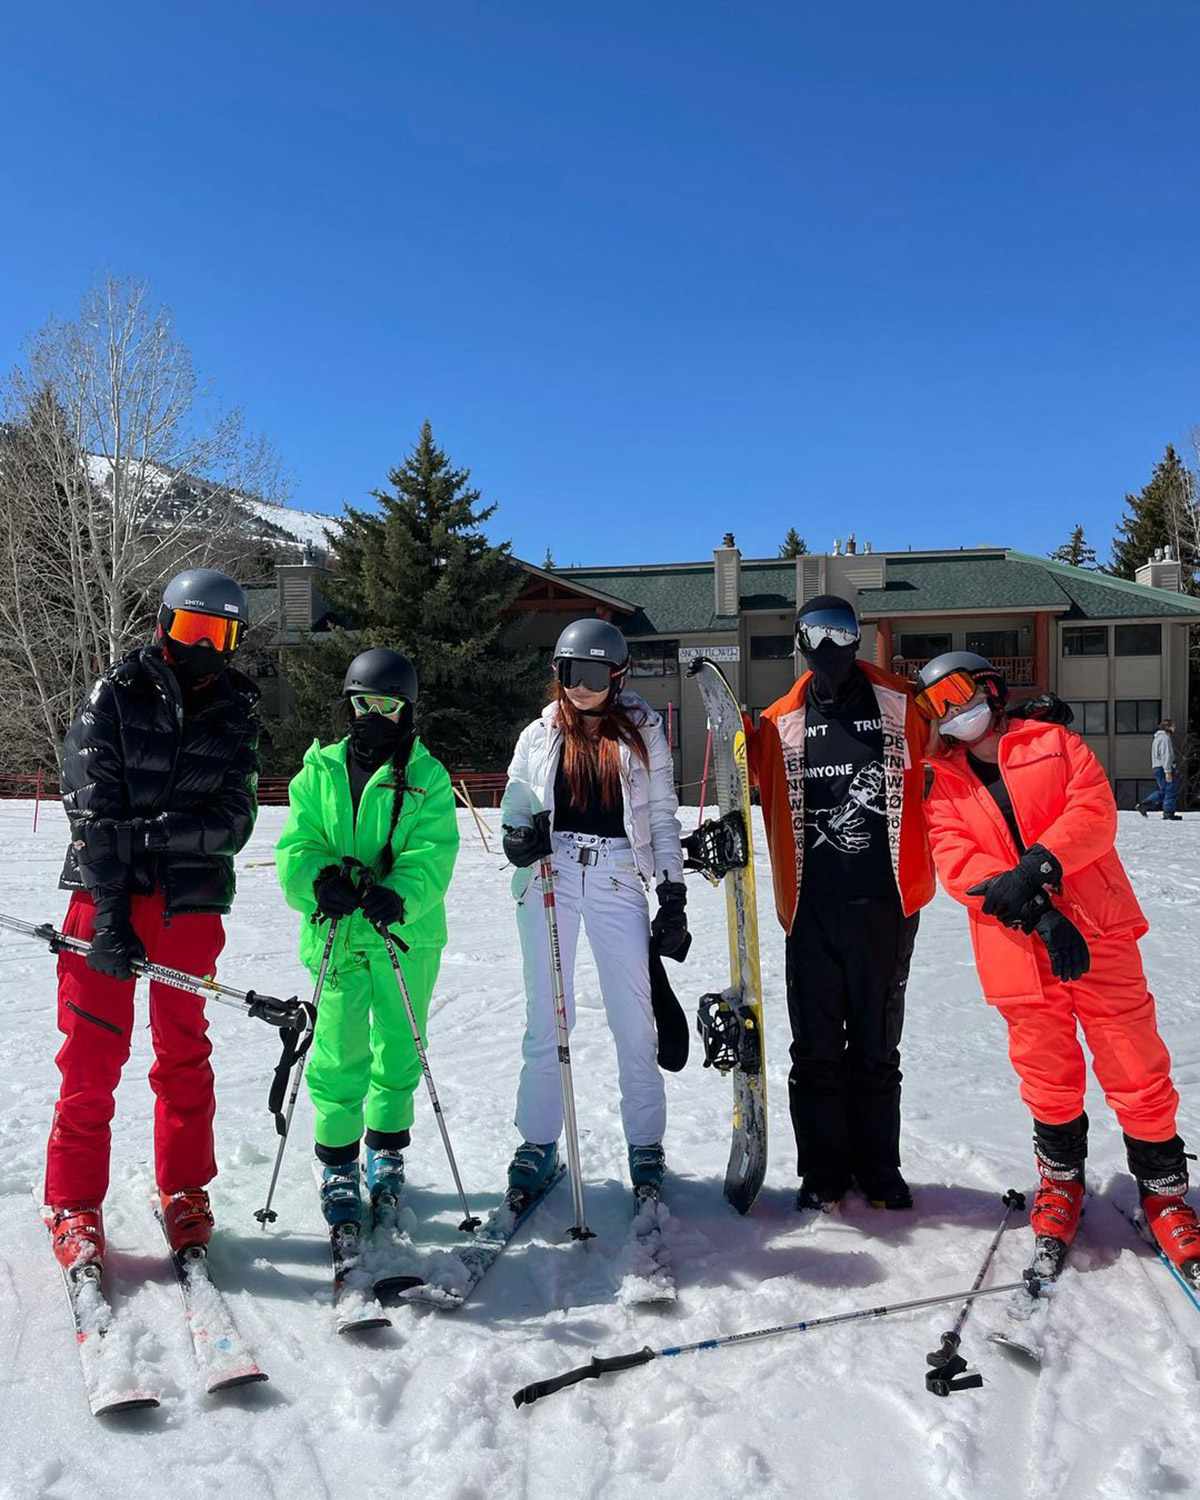 Kourtney Kardashian hangs out with Travis Barker and his kids on ski vacation photos